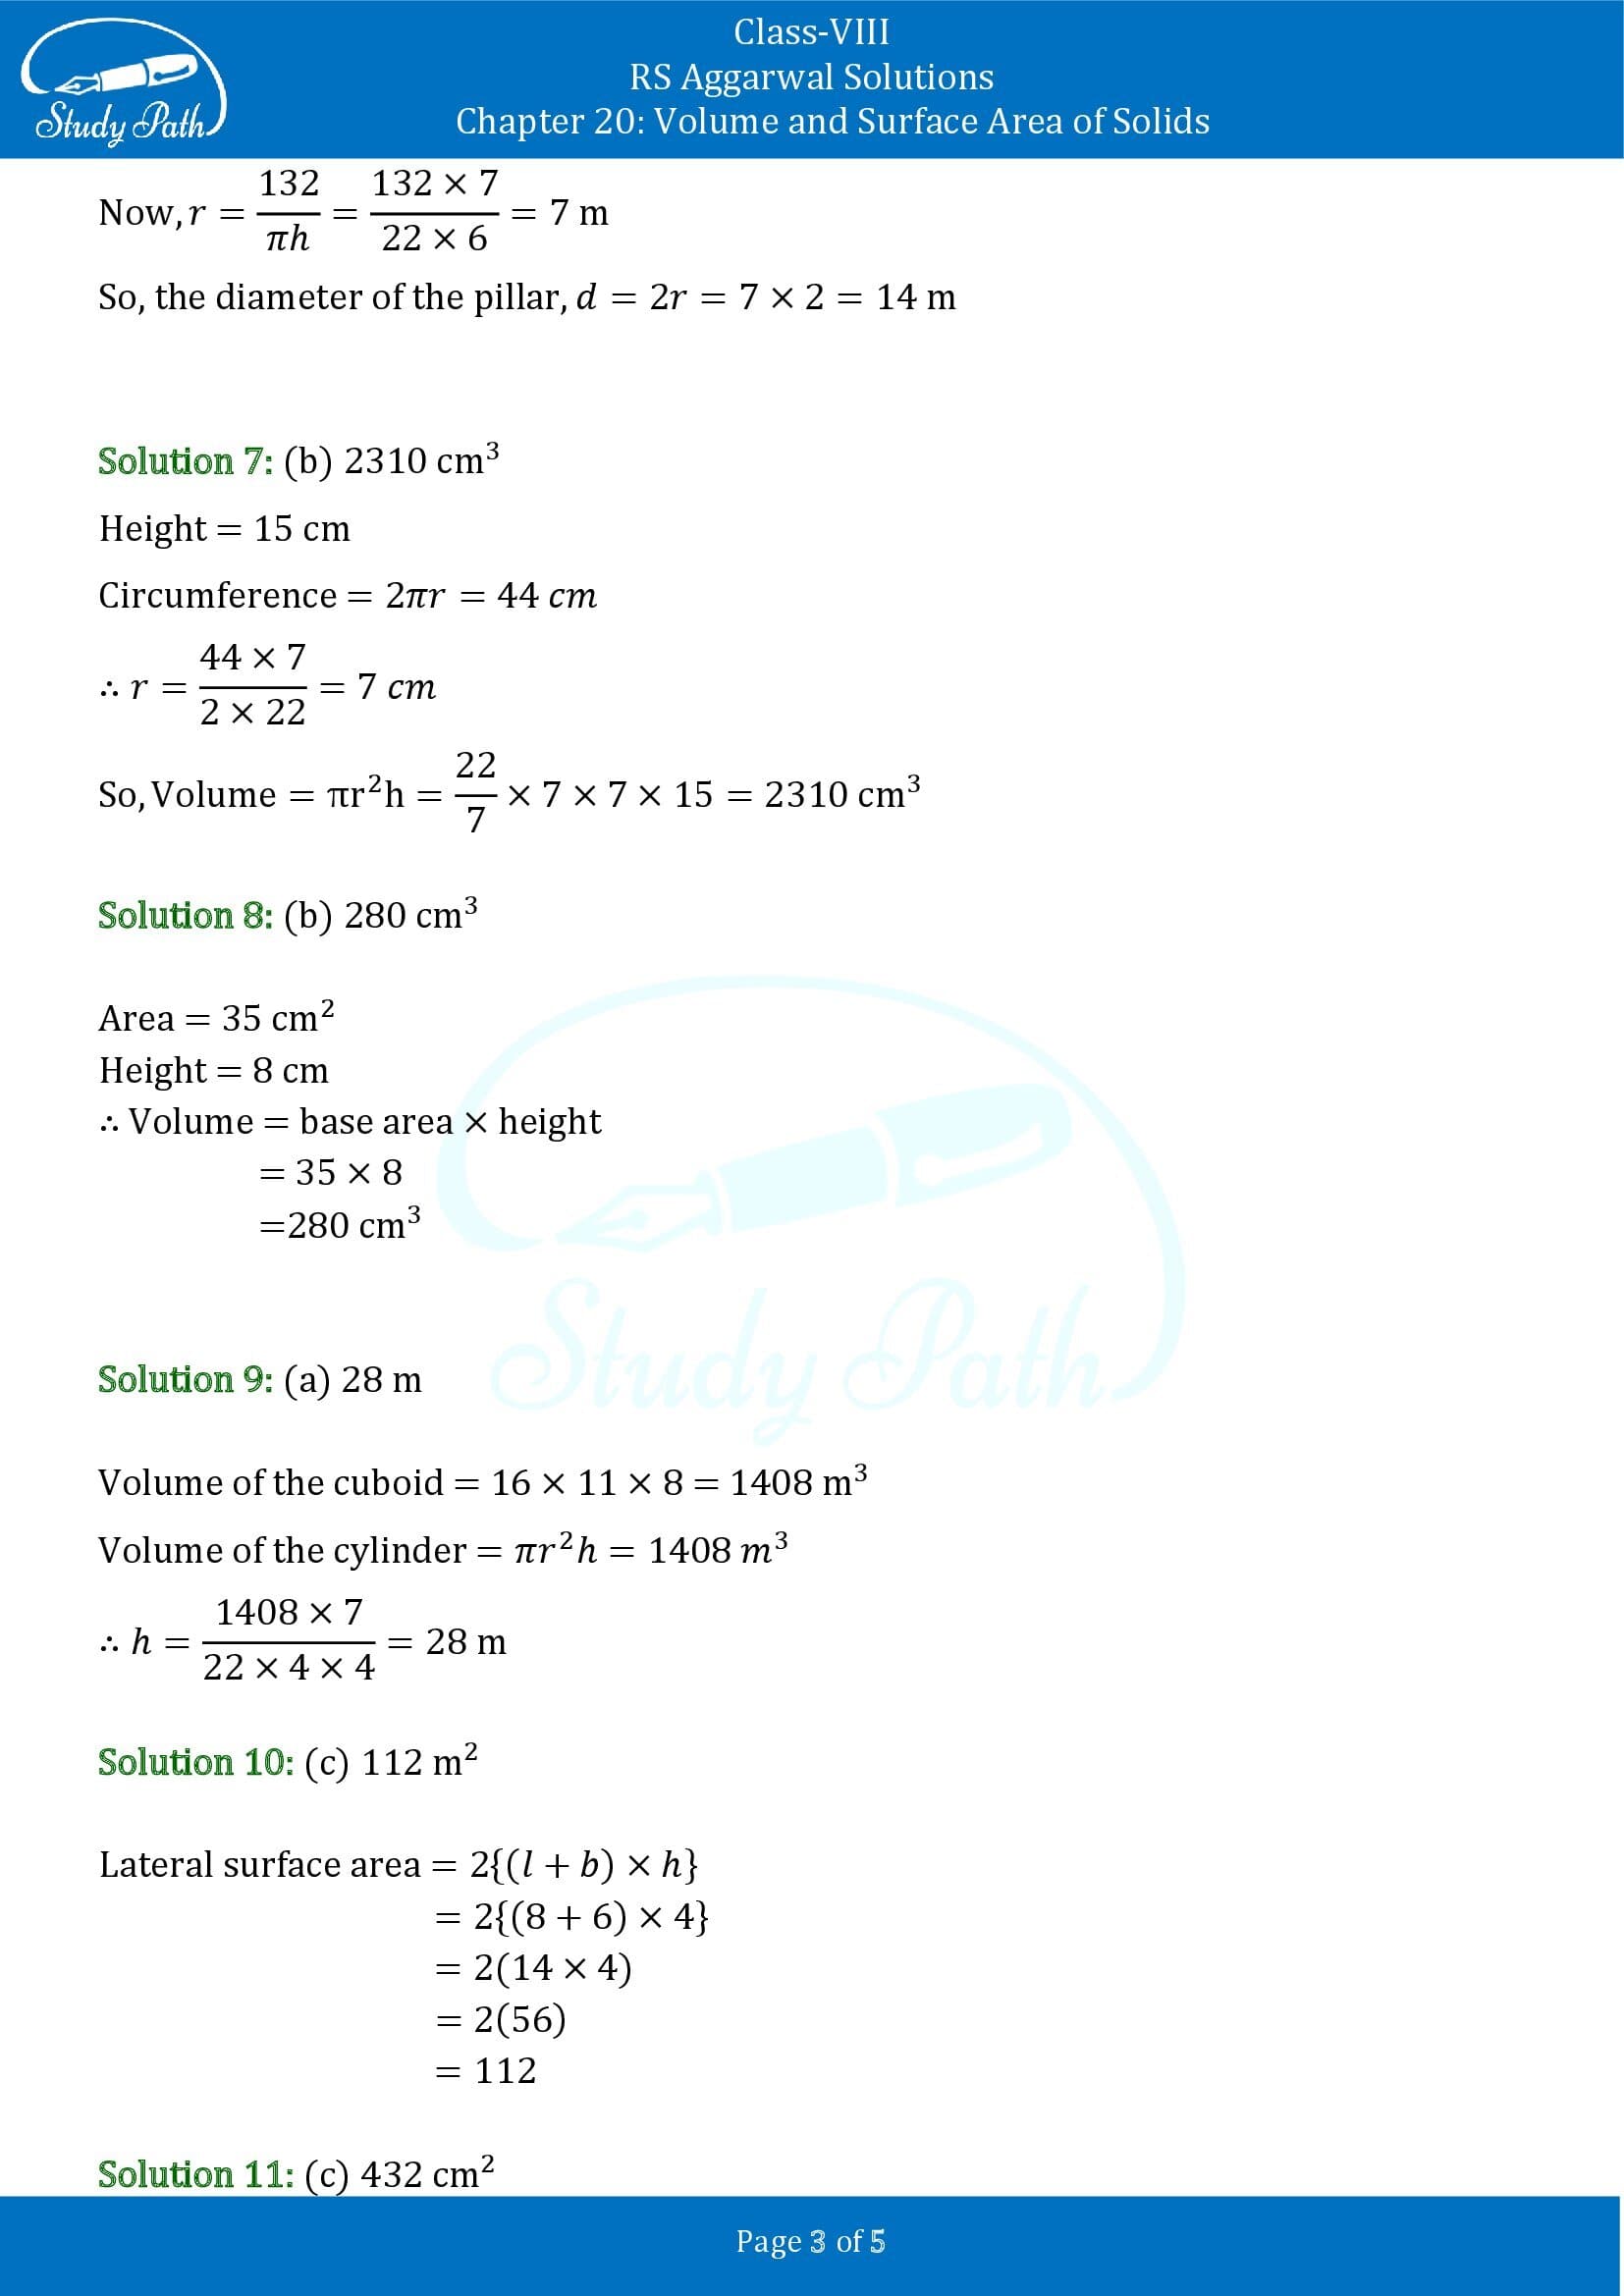 RS Aggarwal Solutions Class 8 Chapter 20 Volume and Surface Area of Solids Test Paper 00003